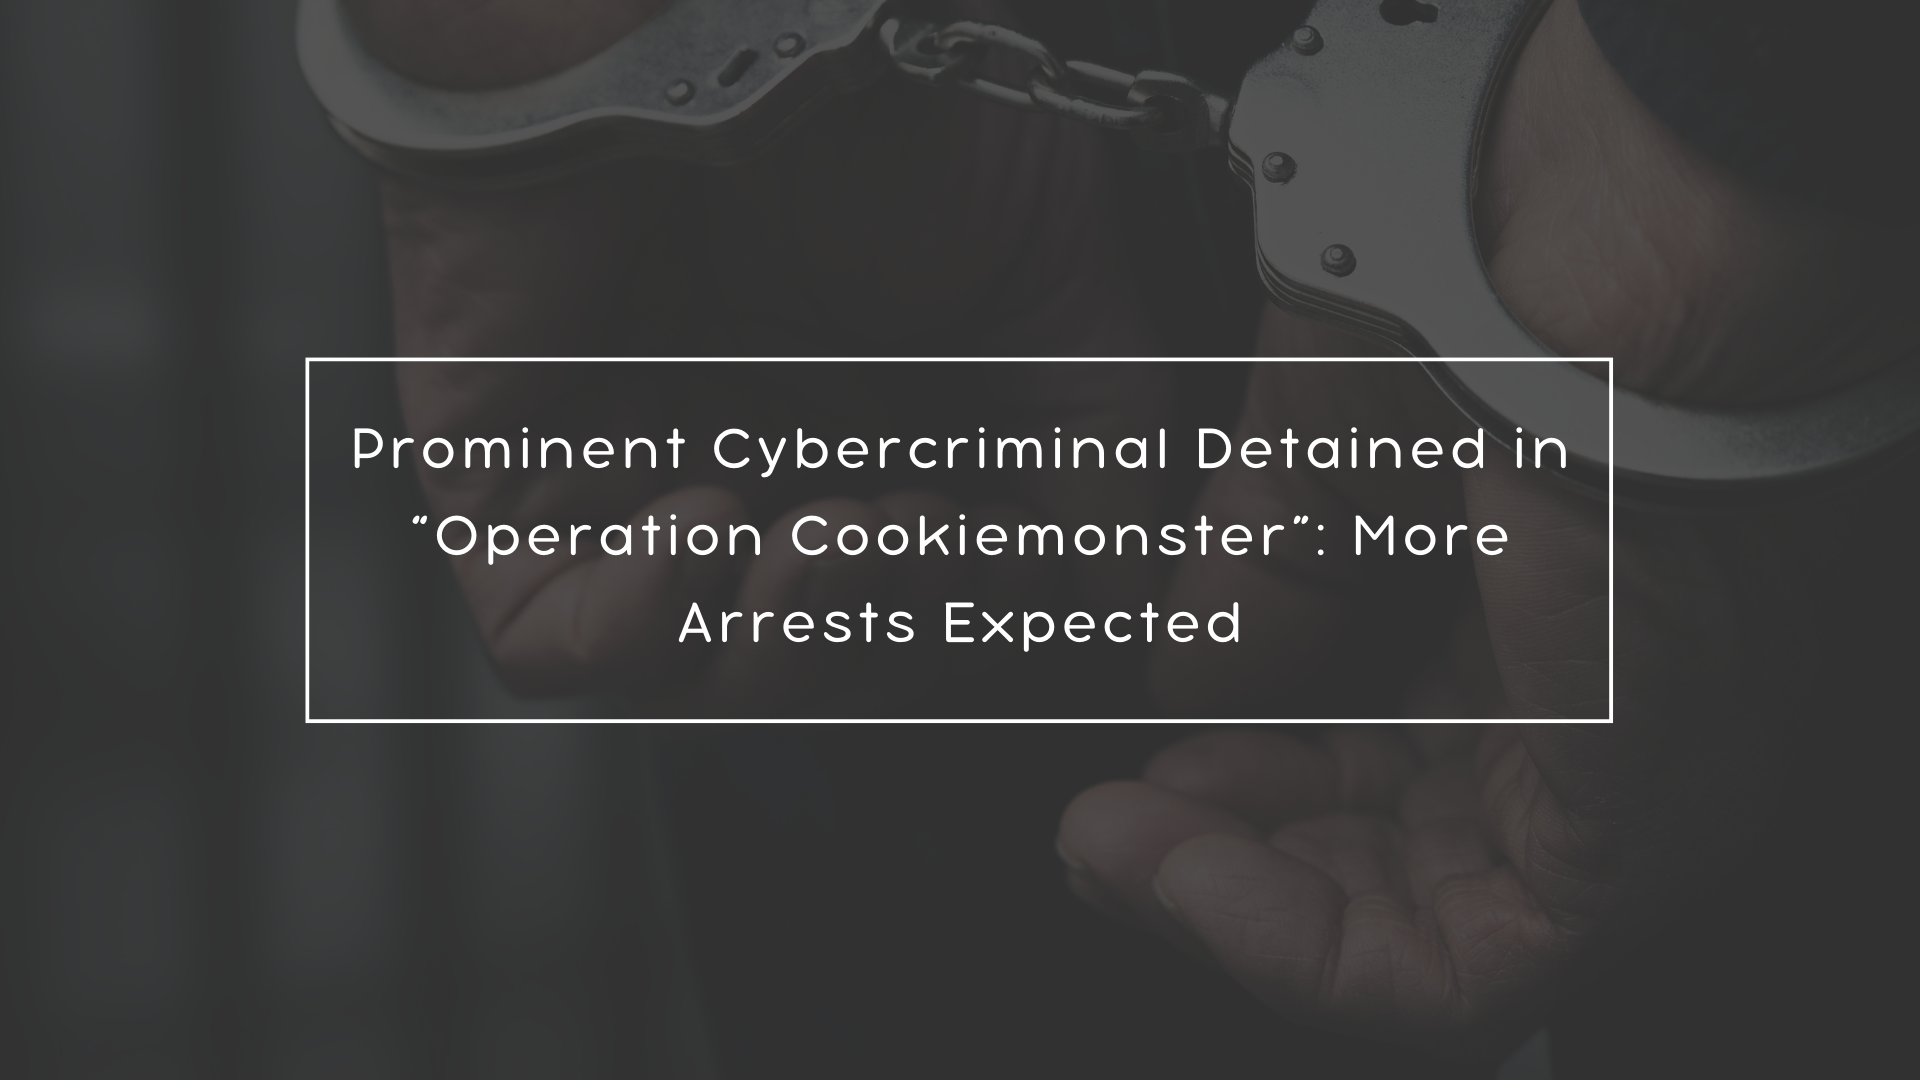 Prominent Cybercriminal Detained in “Operation Cookiemonster”: More Arrests Expected